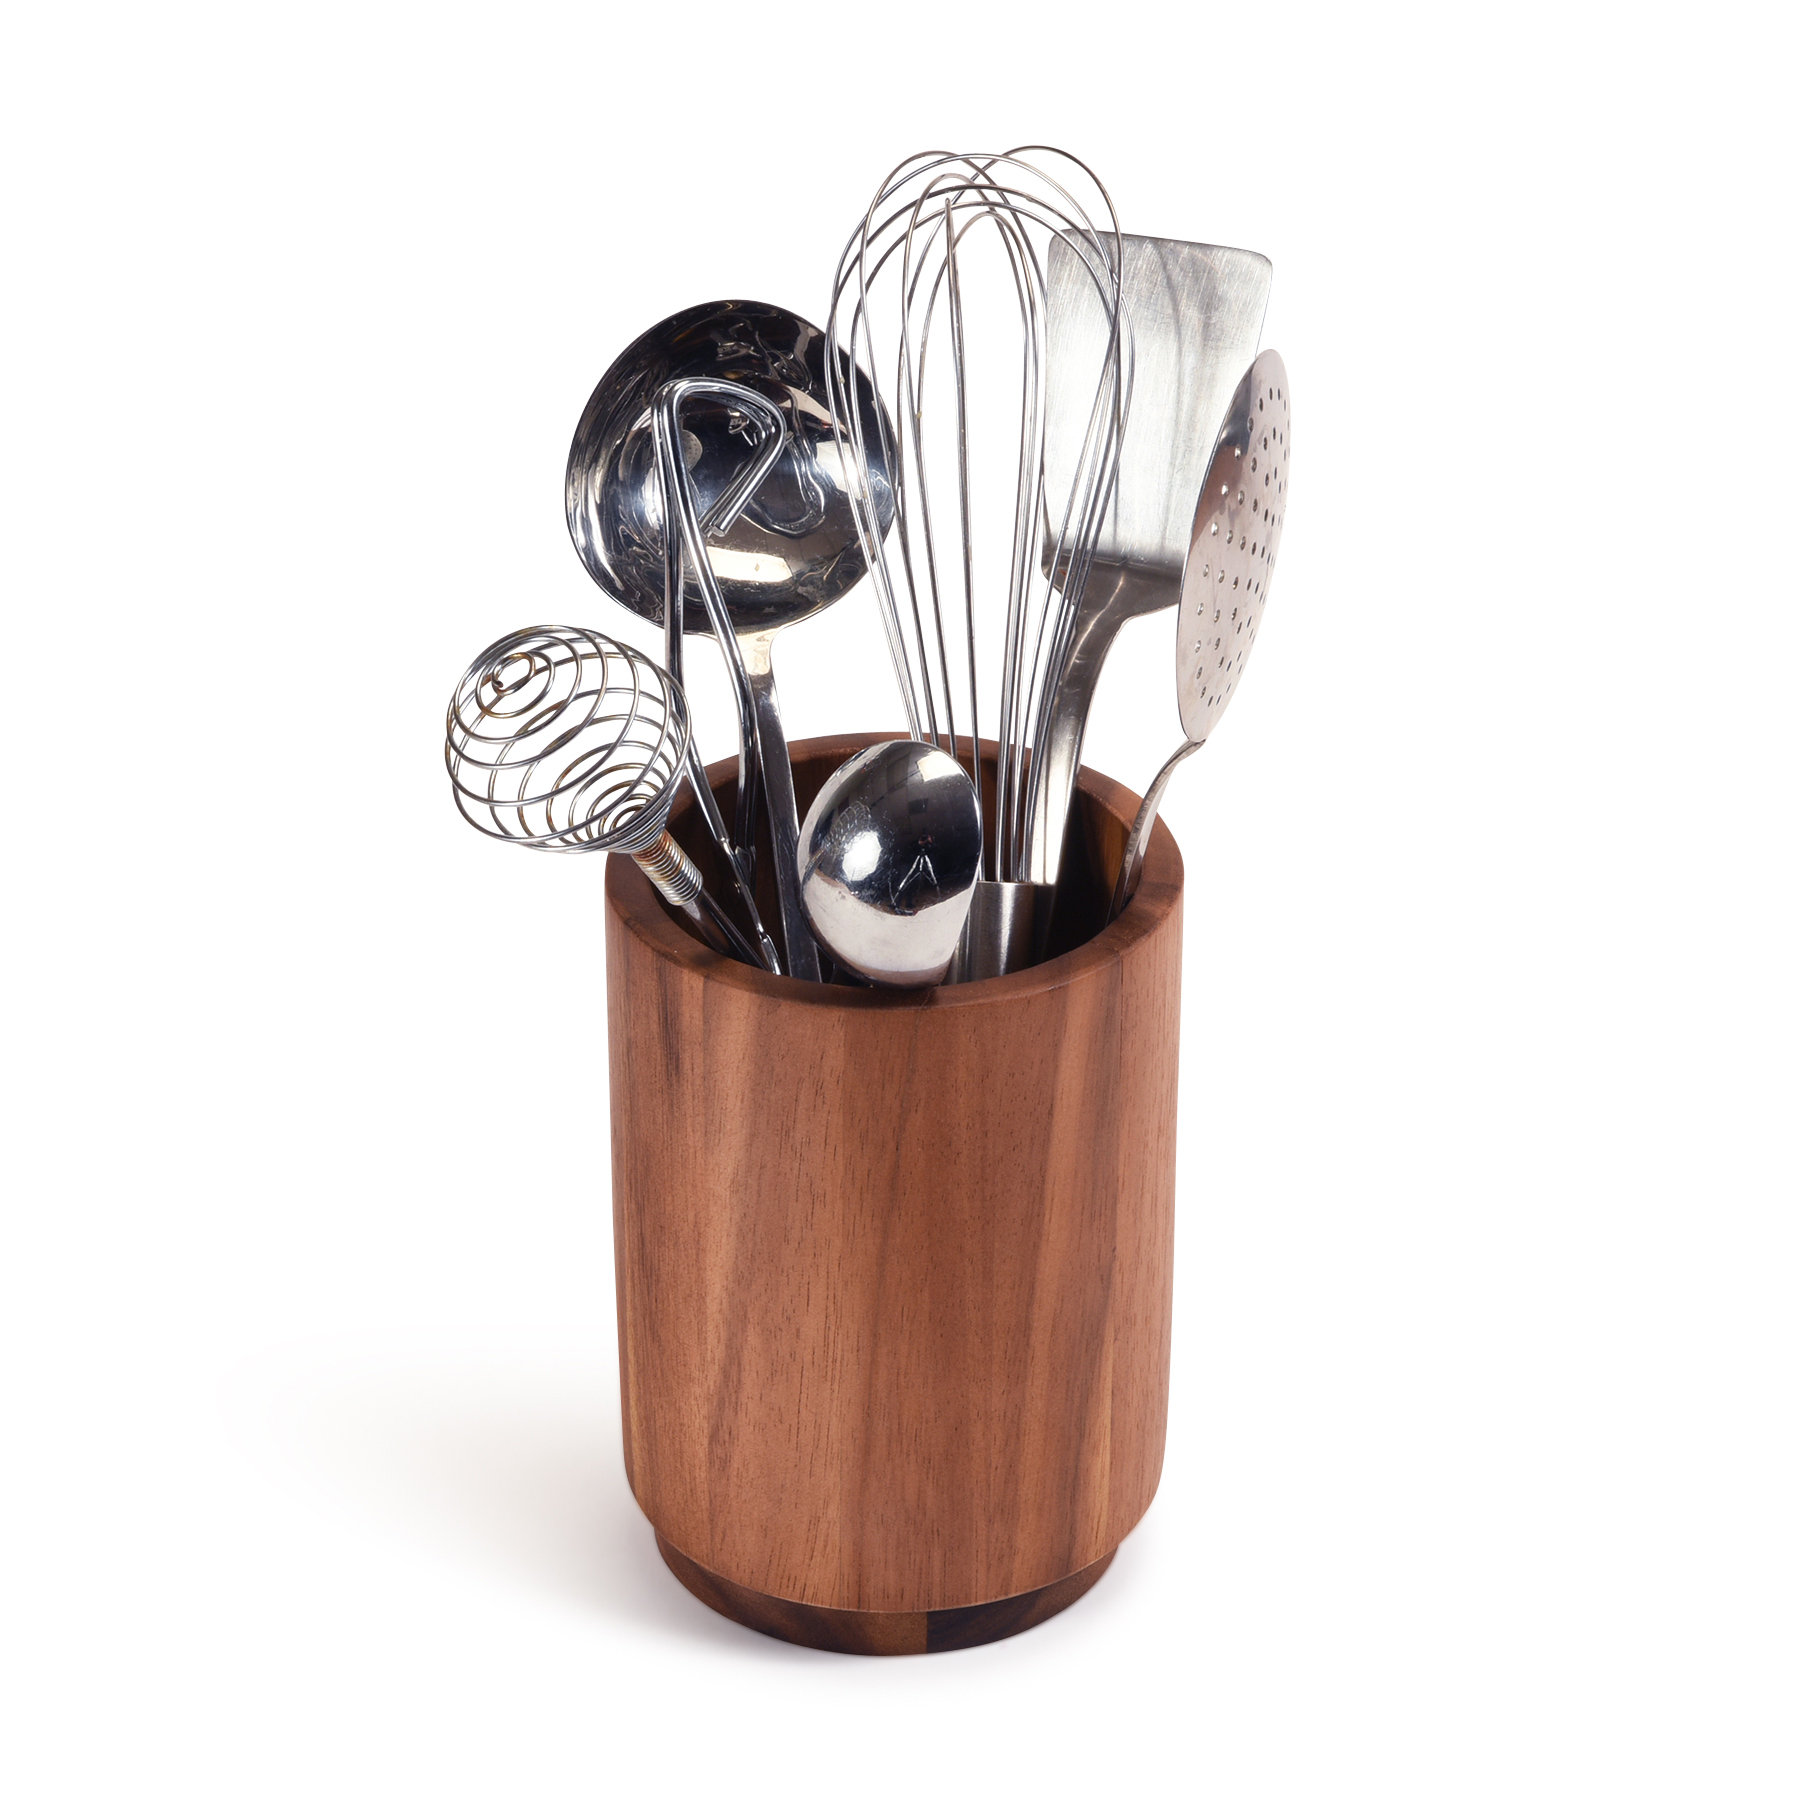 Crate & Barrel Acacia Utensils with Holder, Set of 6 + Reviews